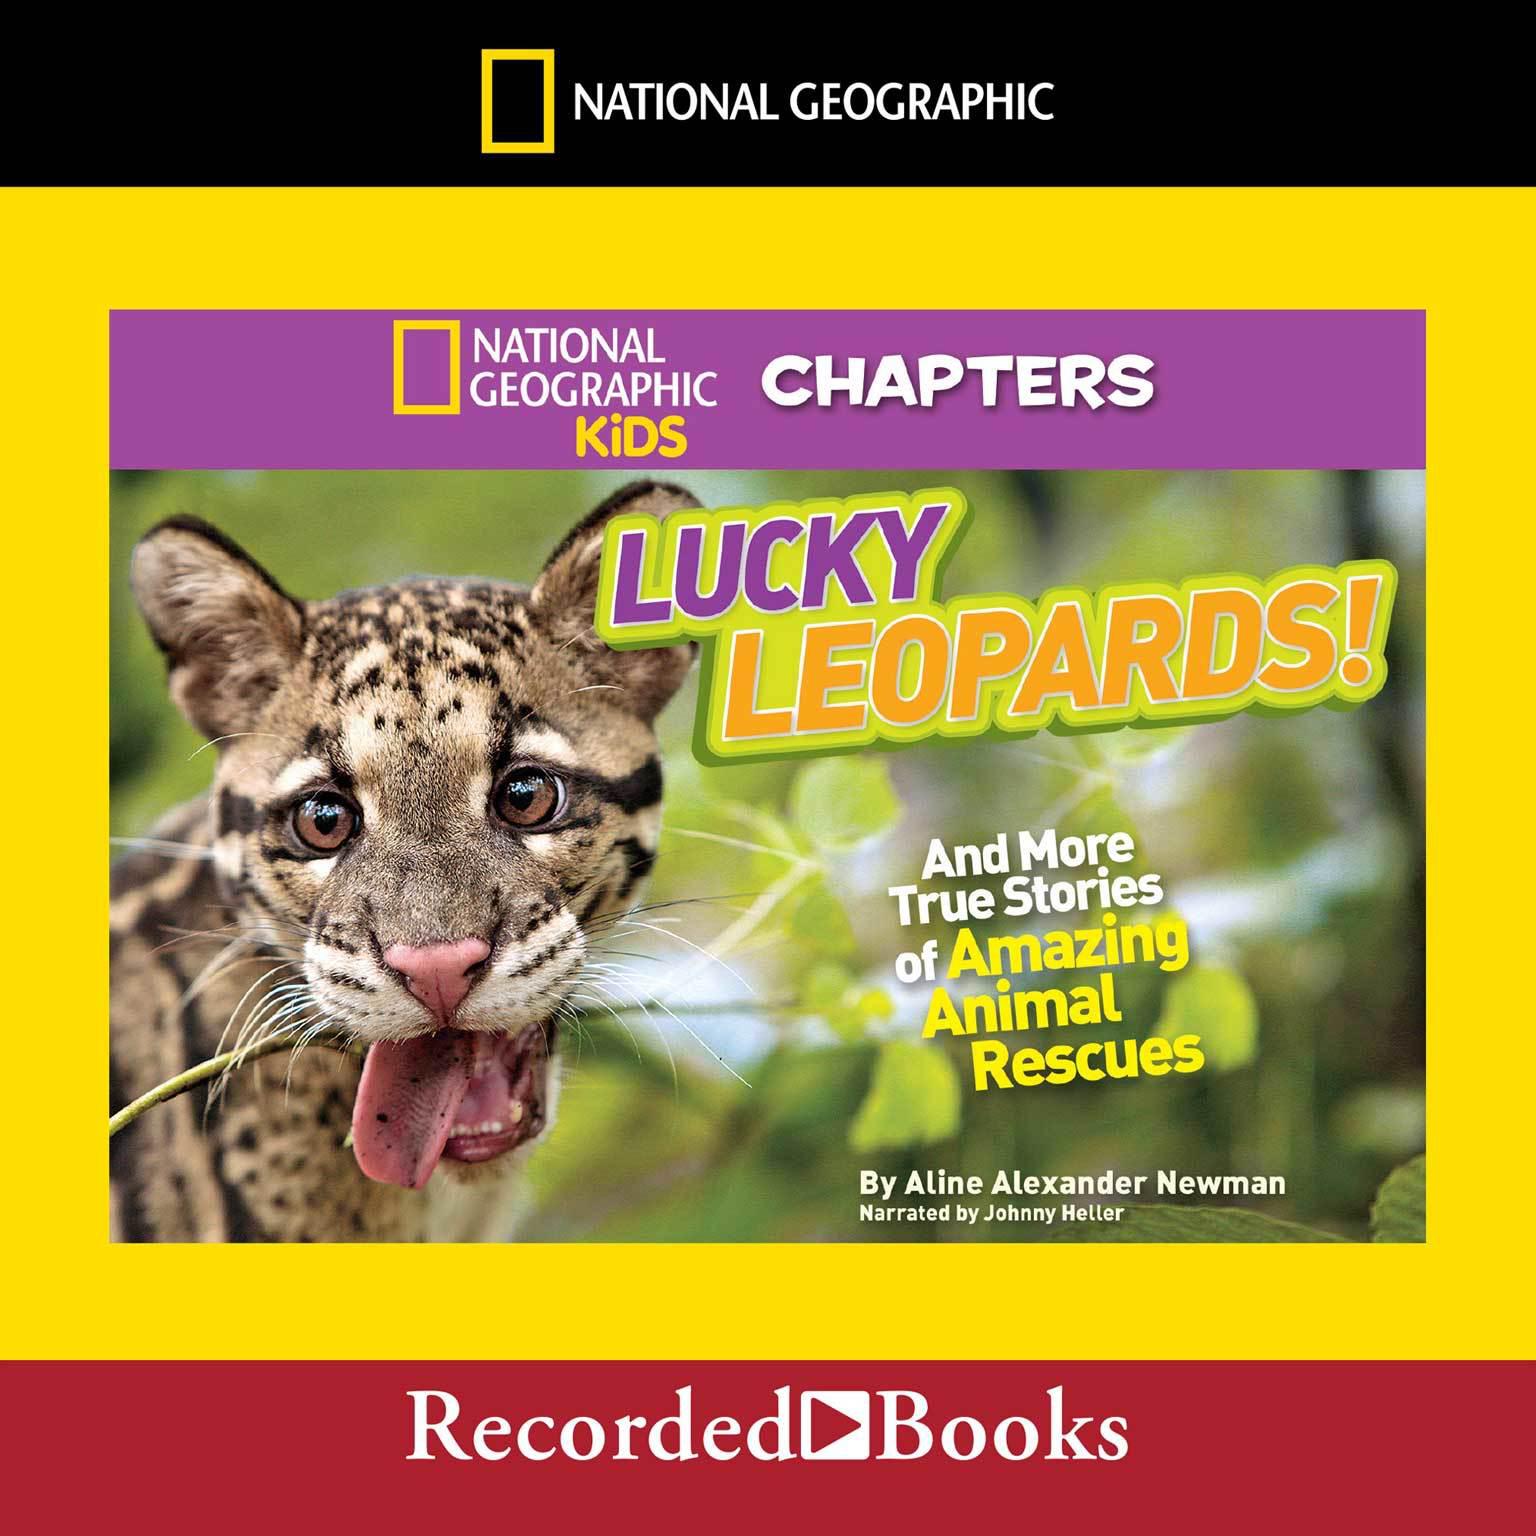 Lucky Leopards: And More True Stories of Amazing Animal Rescues Audiobook, by Aline Alexander Newman